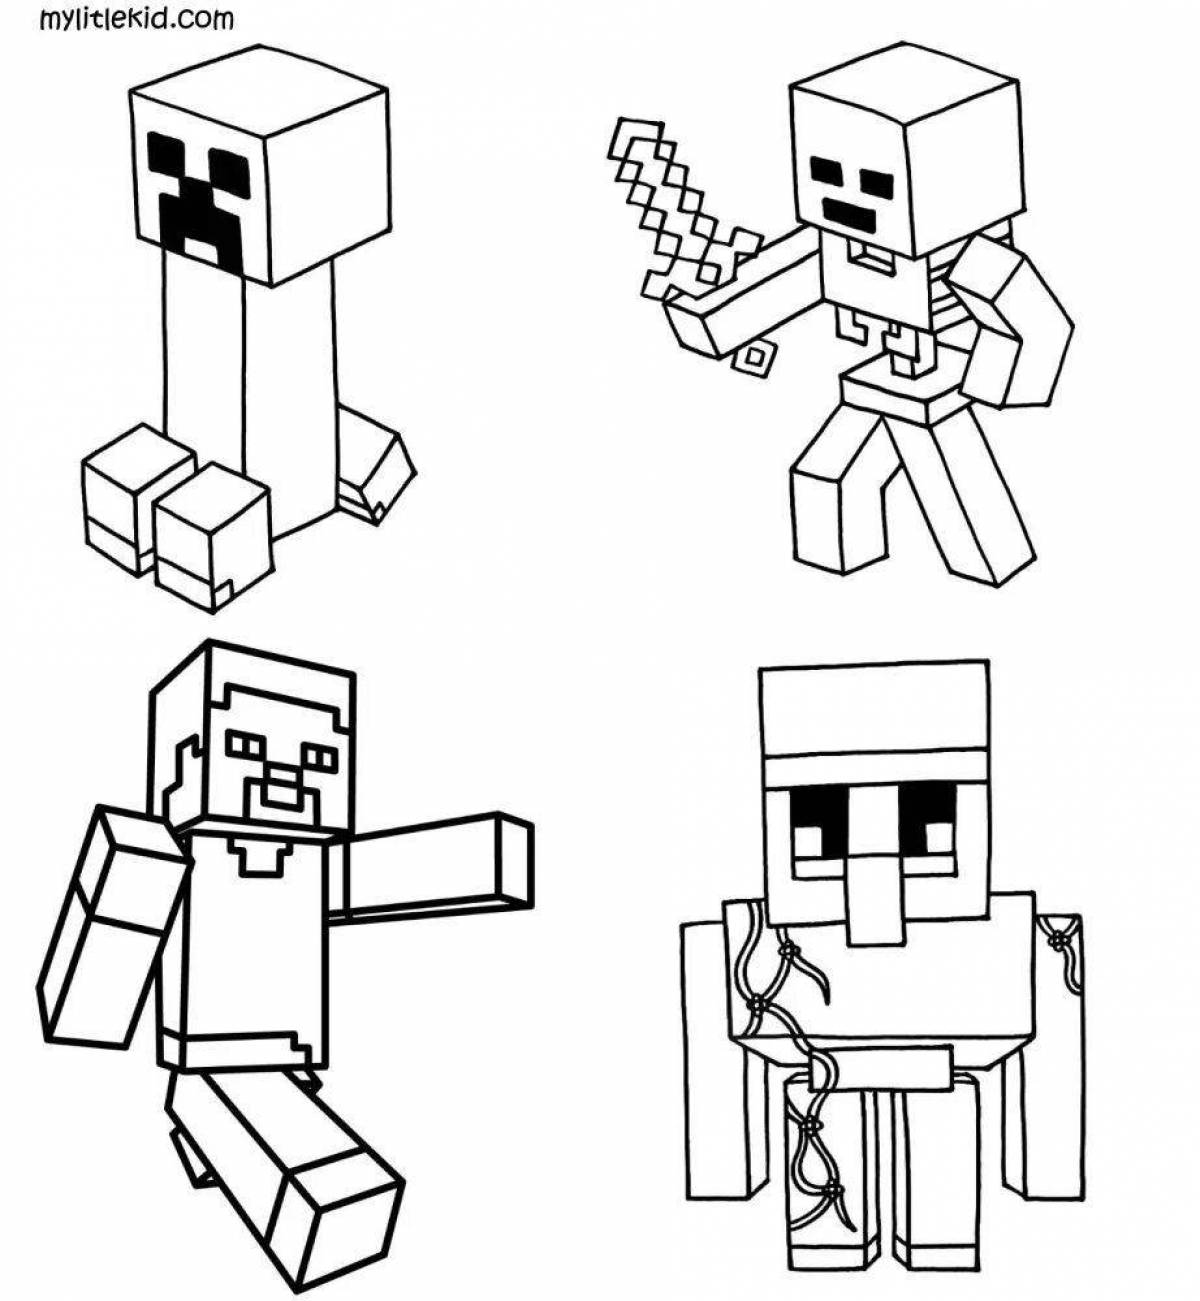 Minecraft characters #1